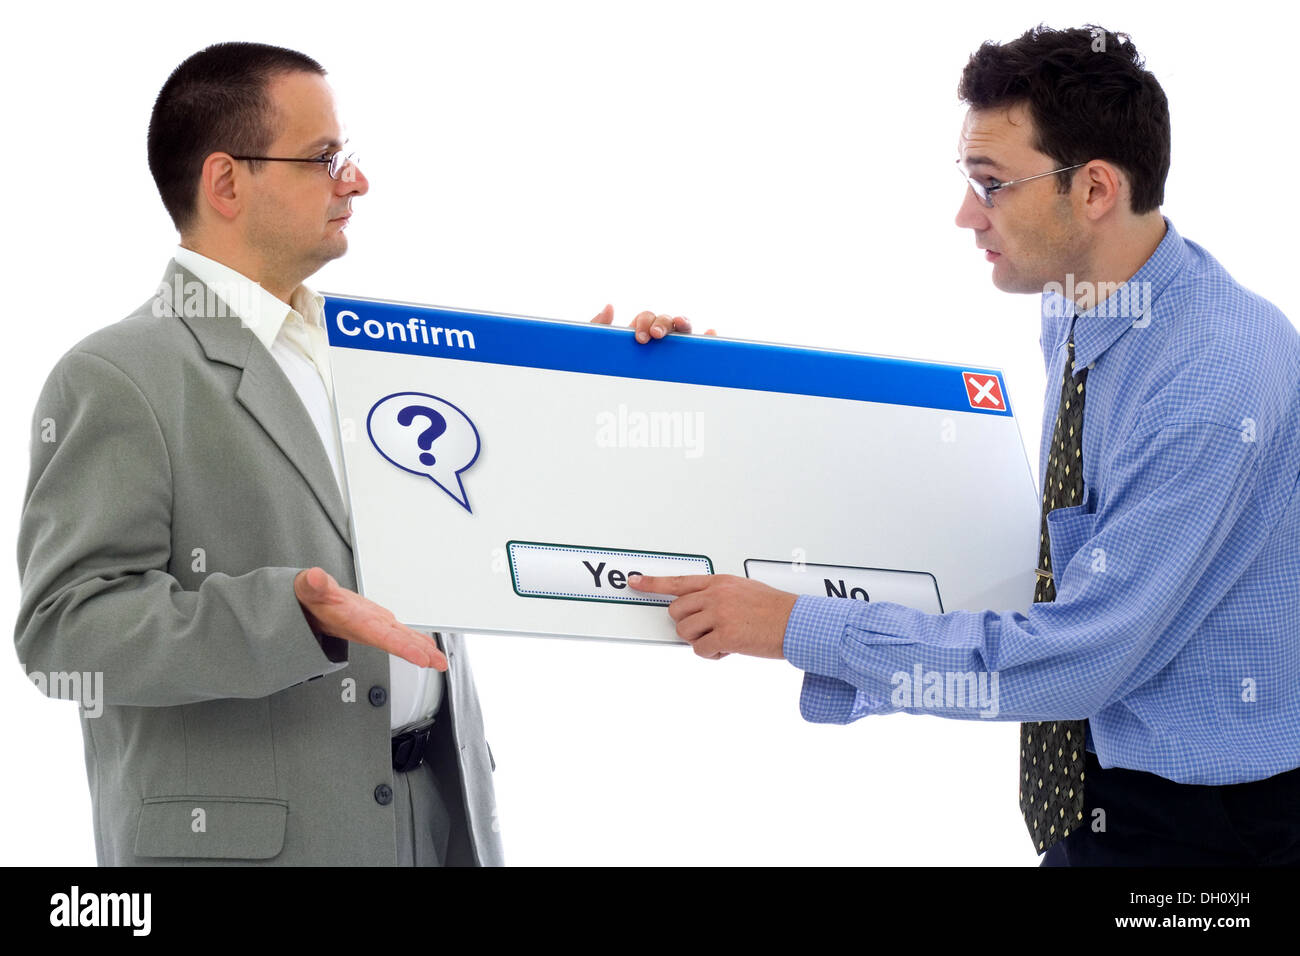 Customer support helping client to make a decision. Two mans with Confirm plate, the helper points Yes. Copy space on the plate Stock Photo